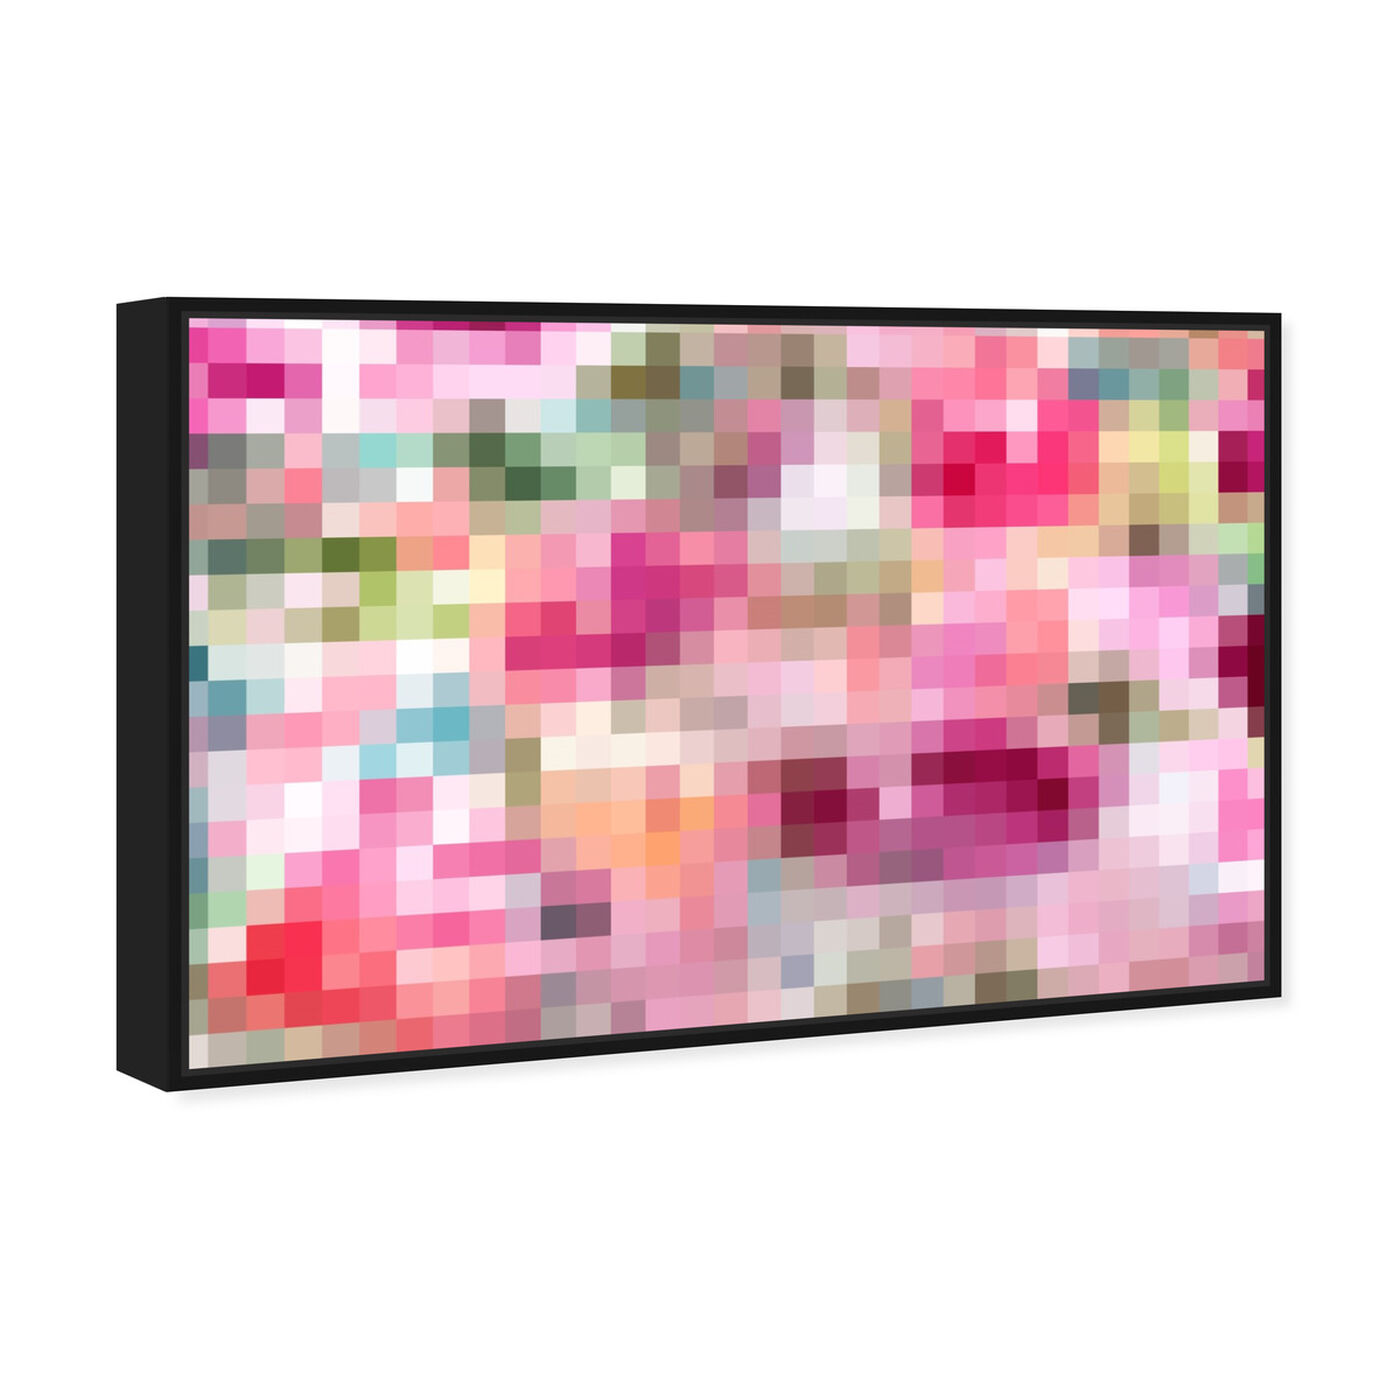 Angled view of Pixel Garden featuring abstract and textures art.